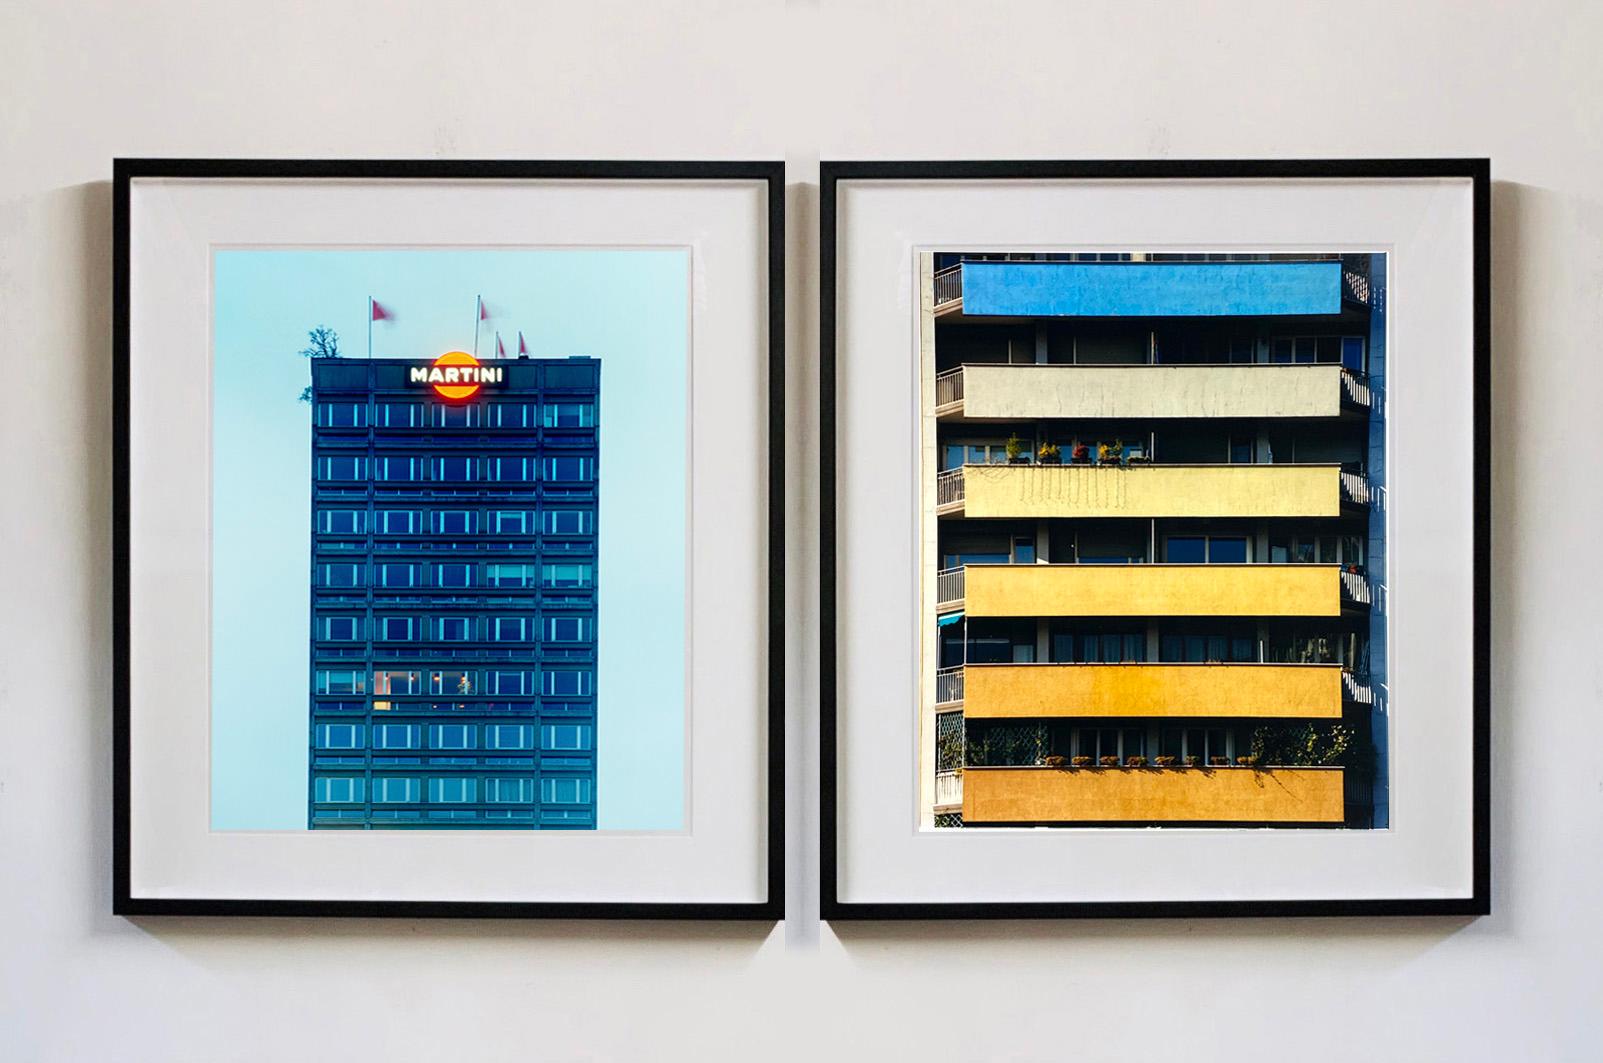 Grey Martini, Milan - Architectural Color Photography For Sale 4